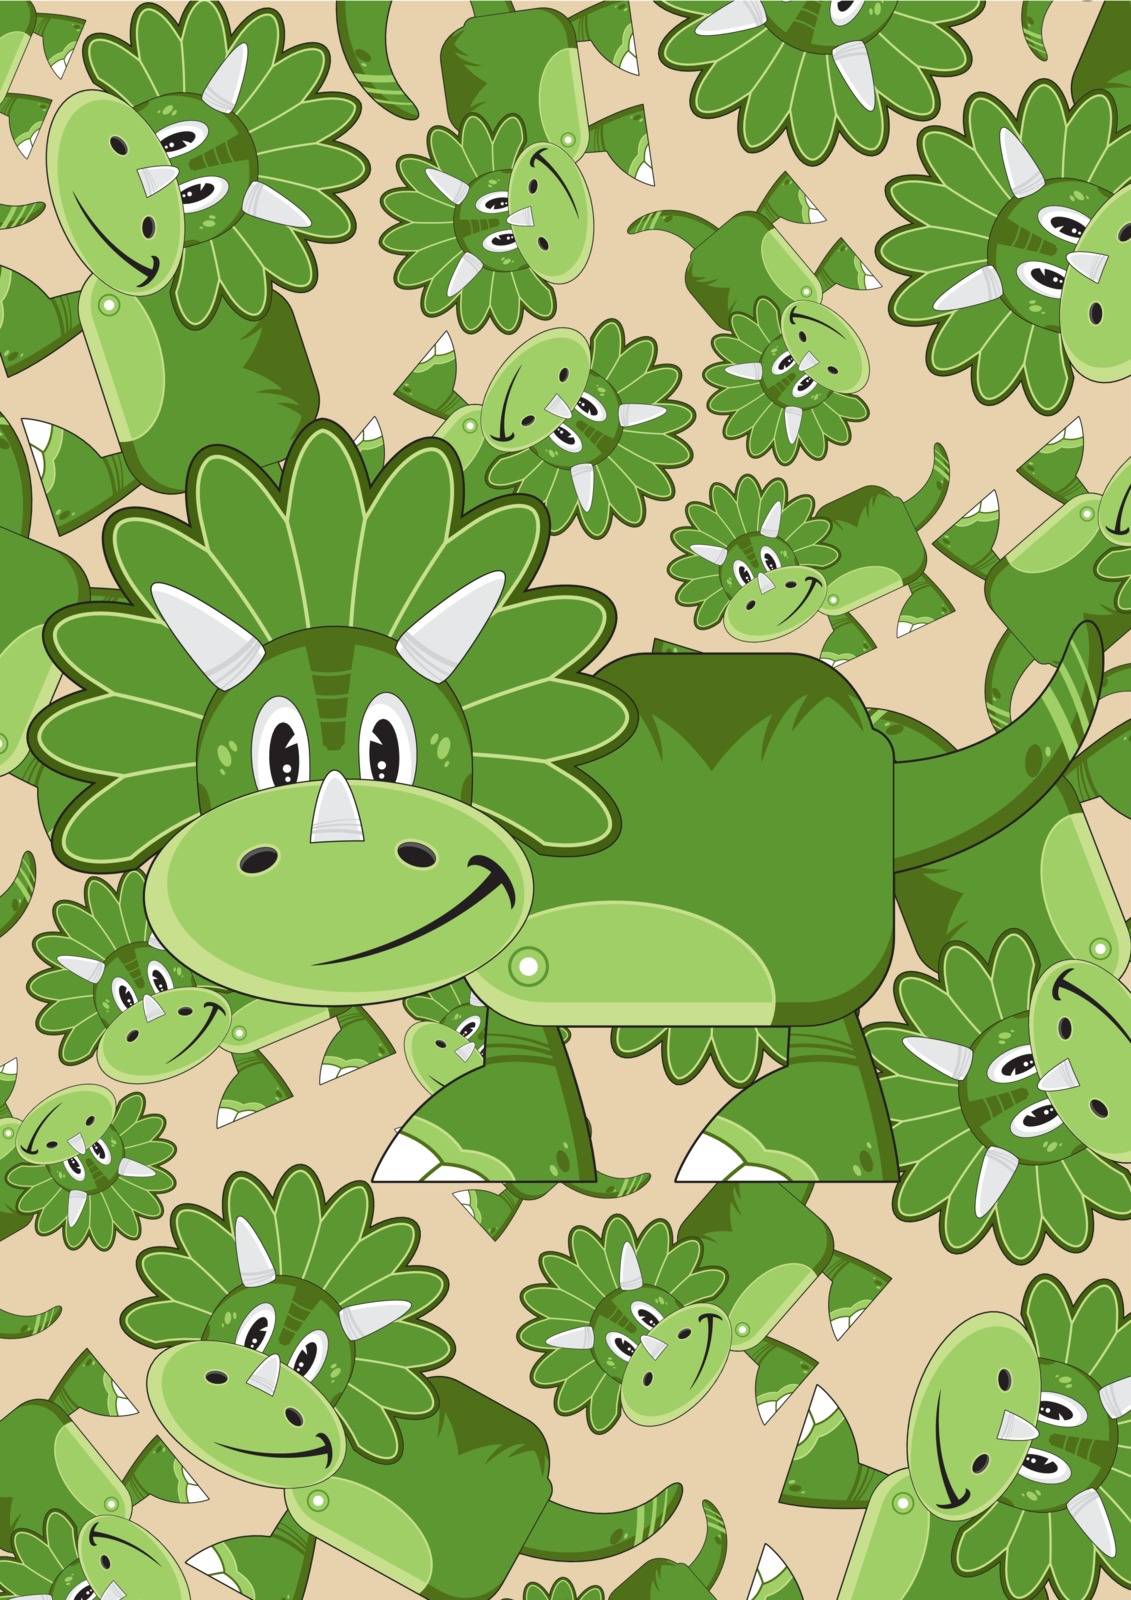 Adorably Cute Cartoon Triceratops Dinosaur with Pattern Illustration - by Mark Murphy Creative